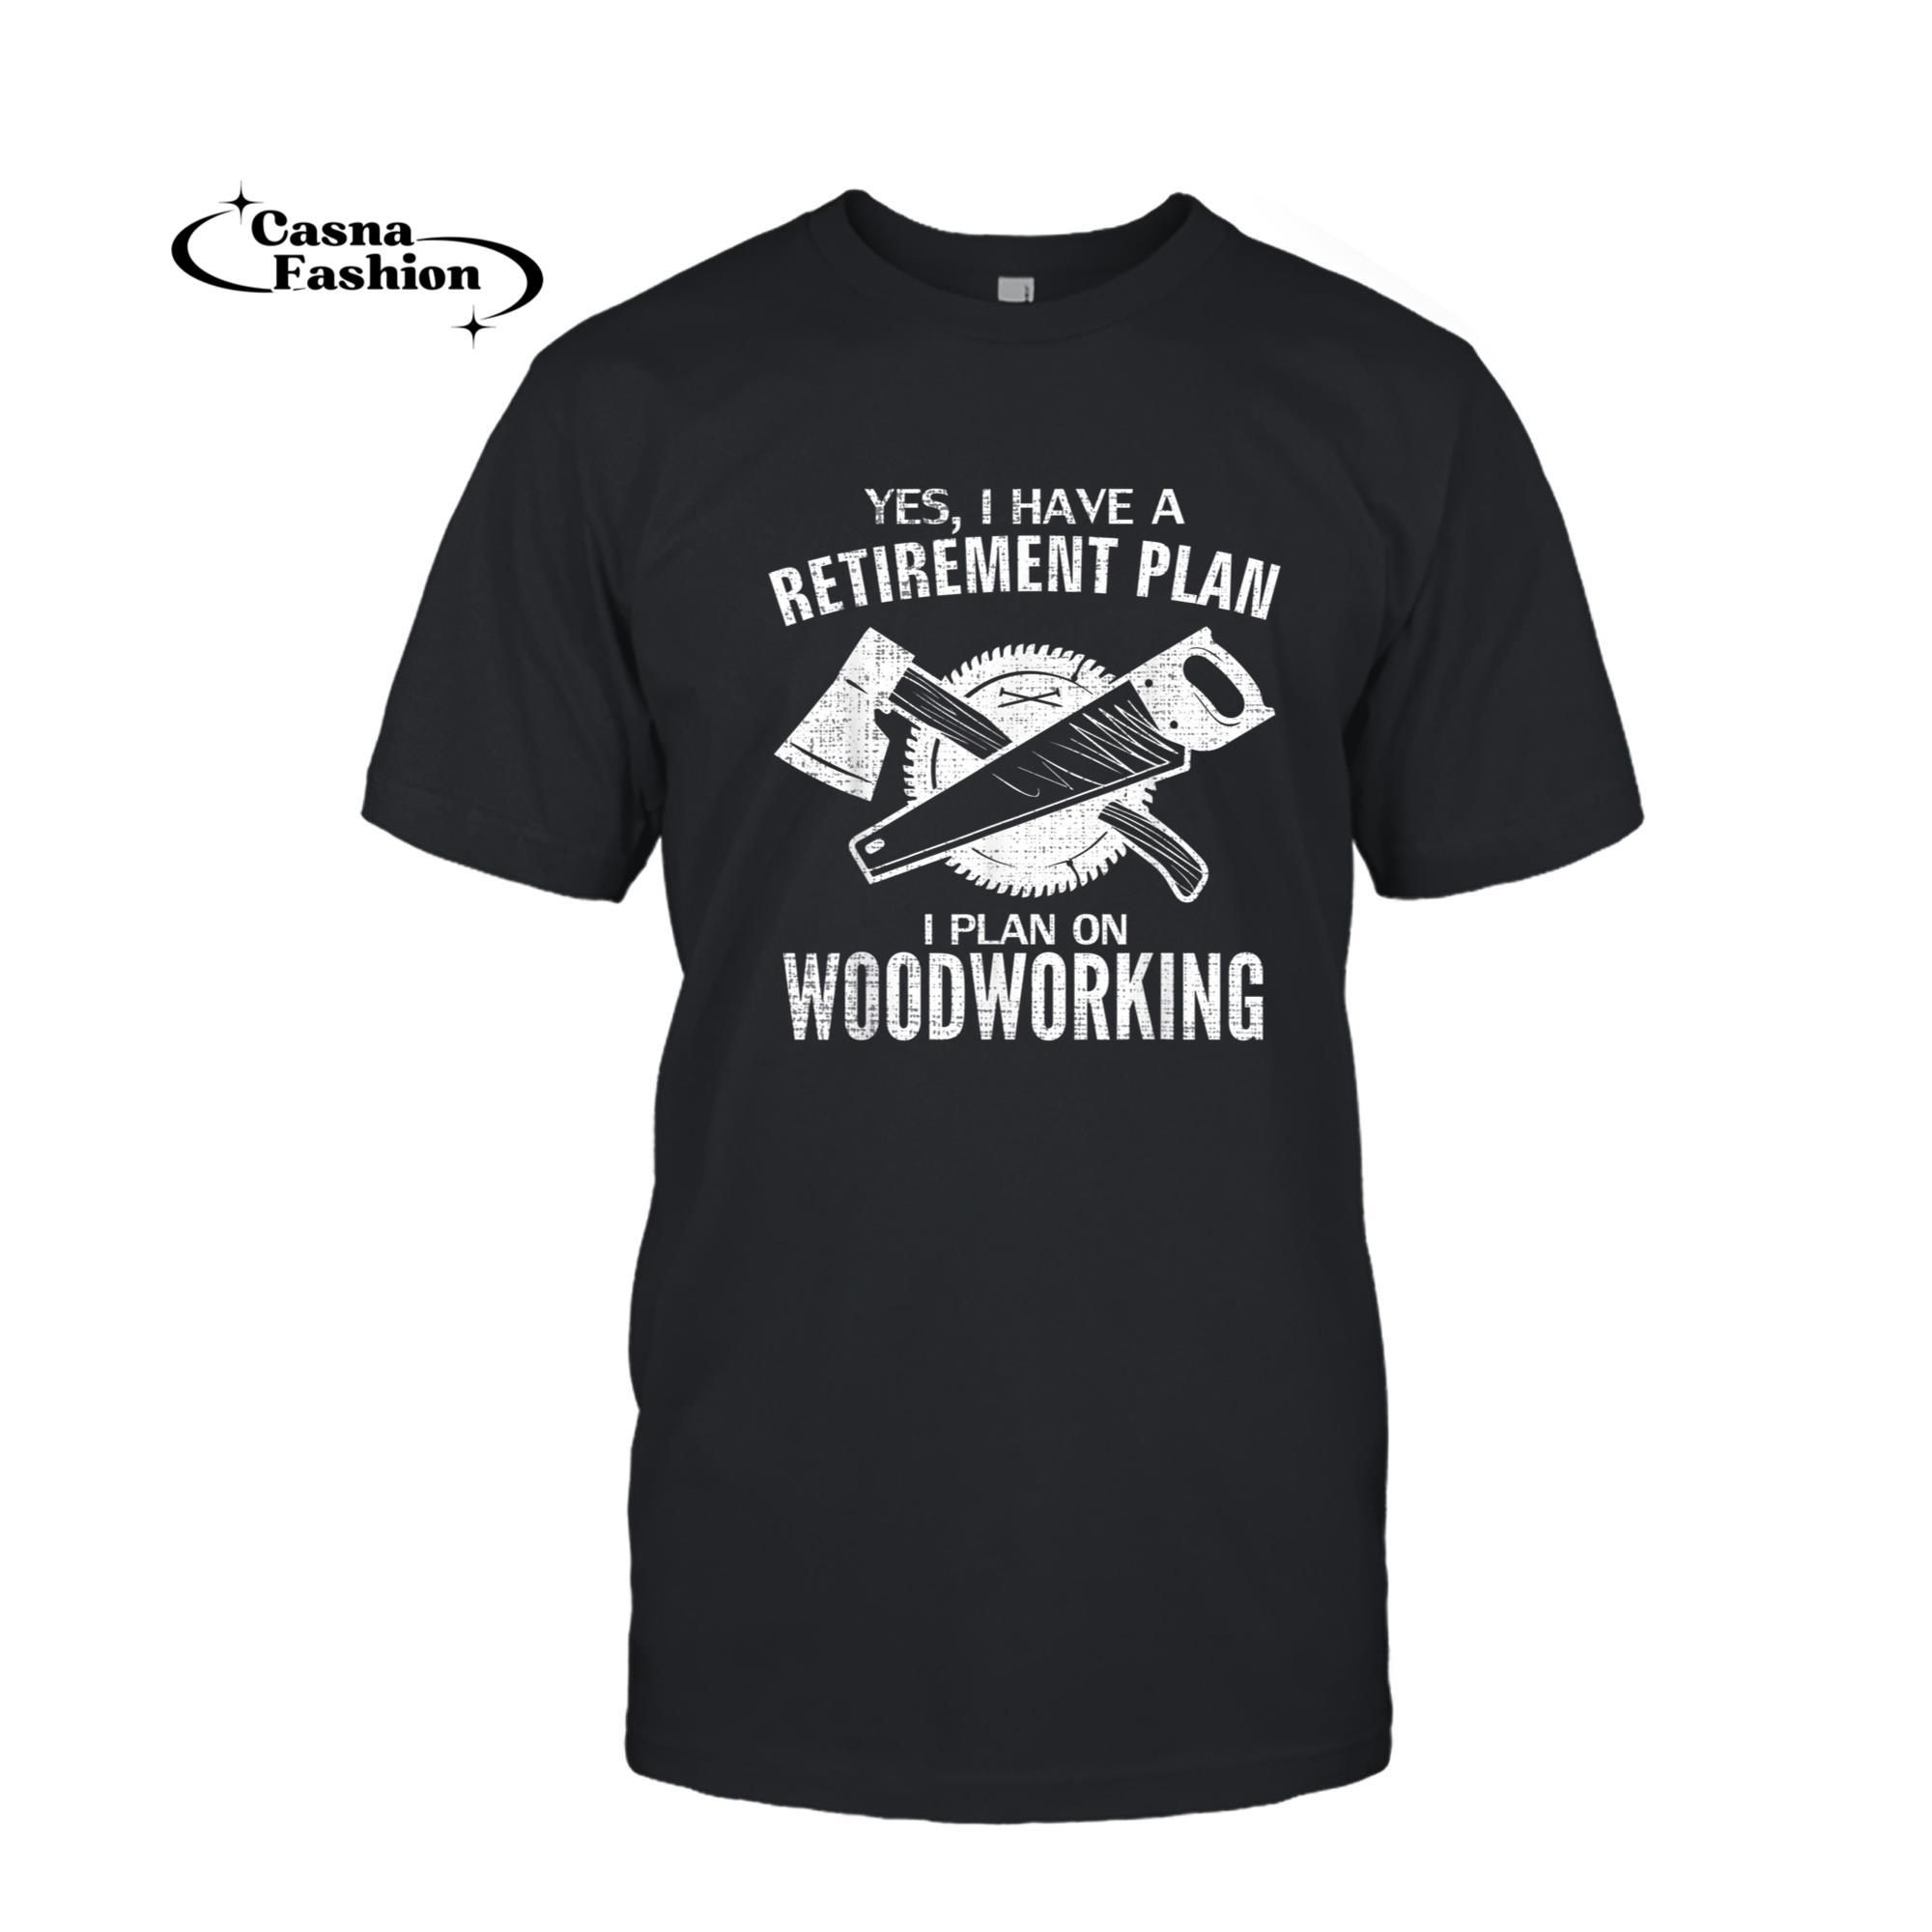 casnafashion_T-shirt_Yes I Do Have A Retirement Plan Woodworking Funny Carpenter T-Shirt_T-shirt_Black